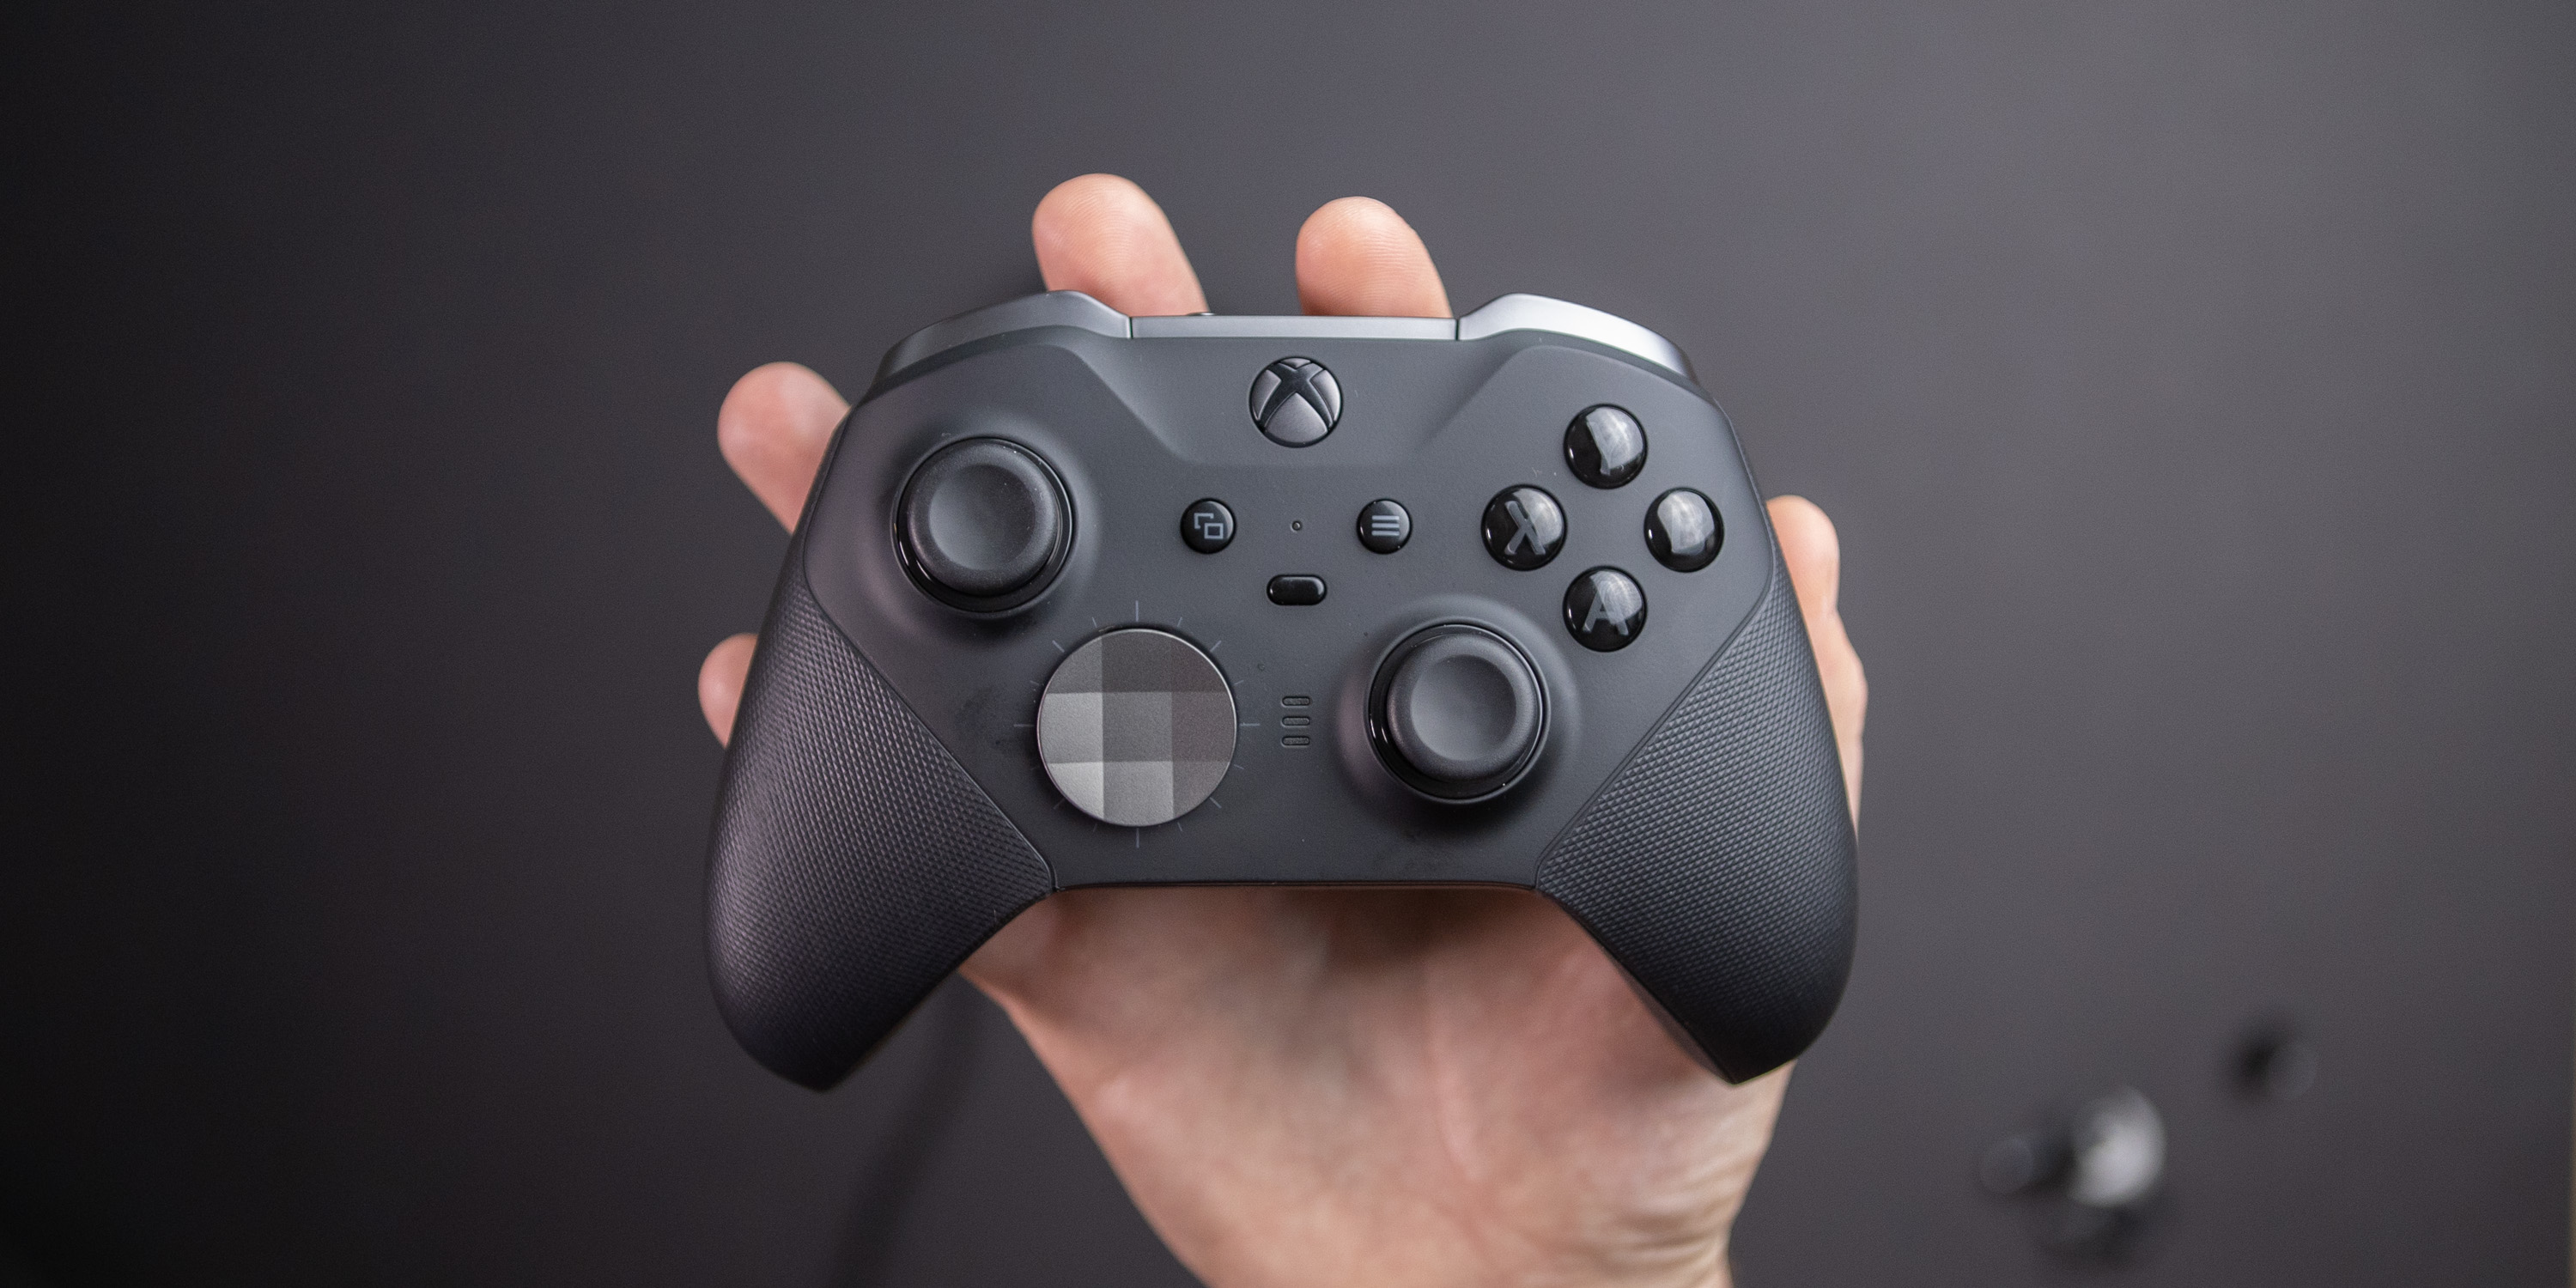 Microsoft Elite Series 2 controller hits one of its best 2020 